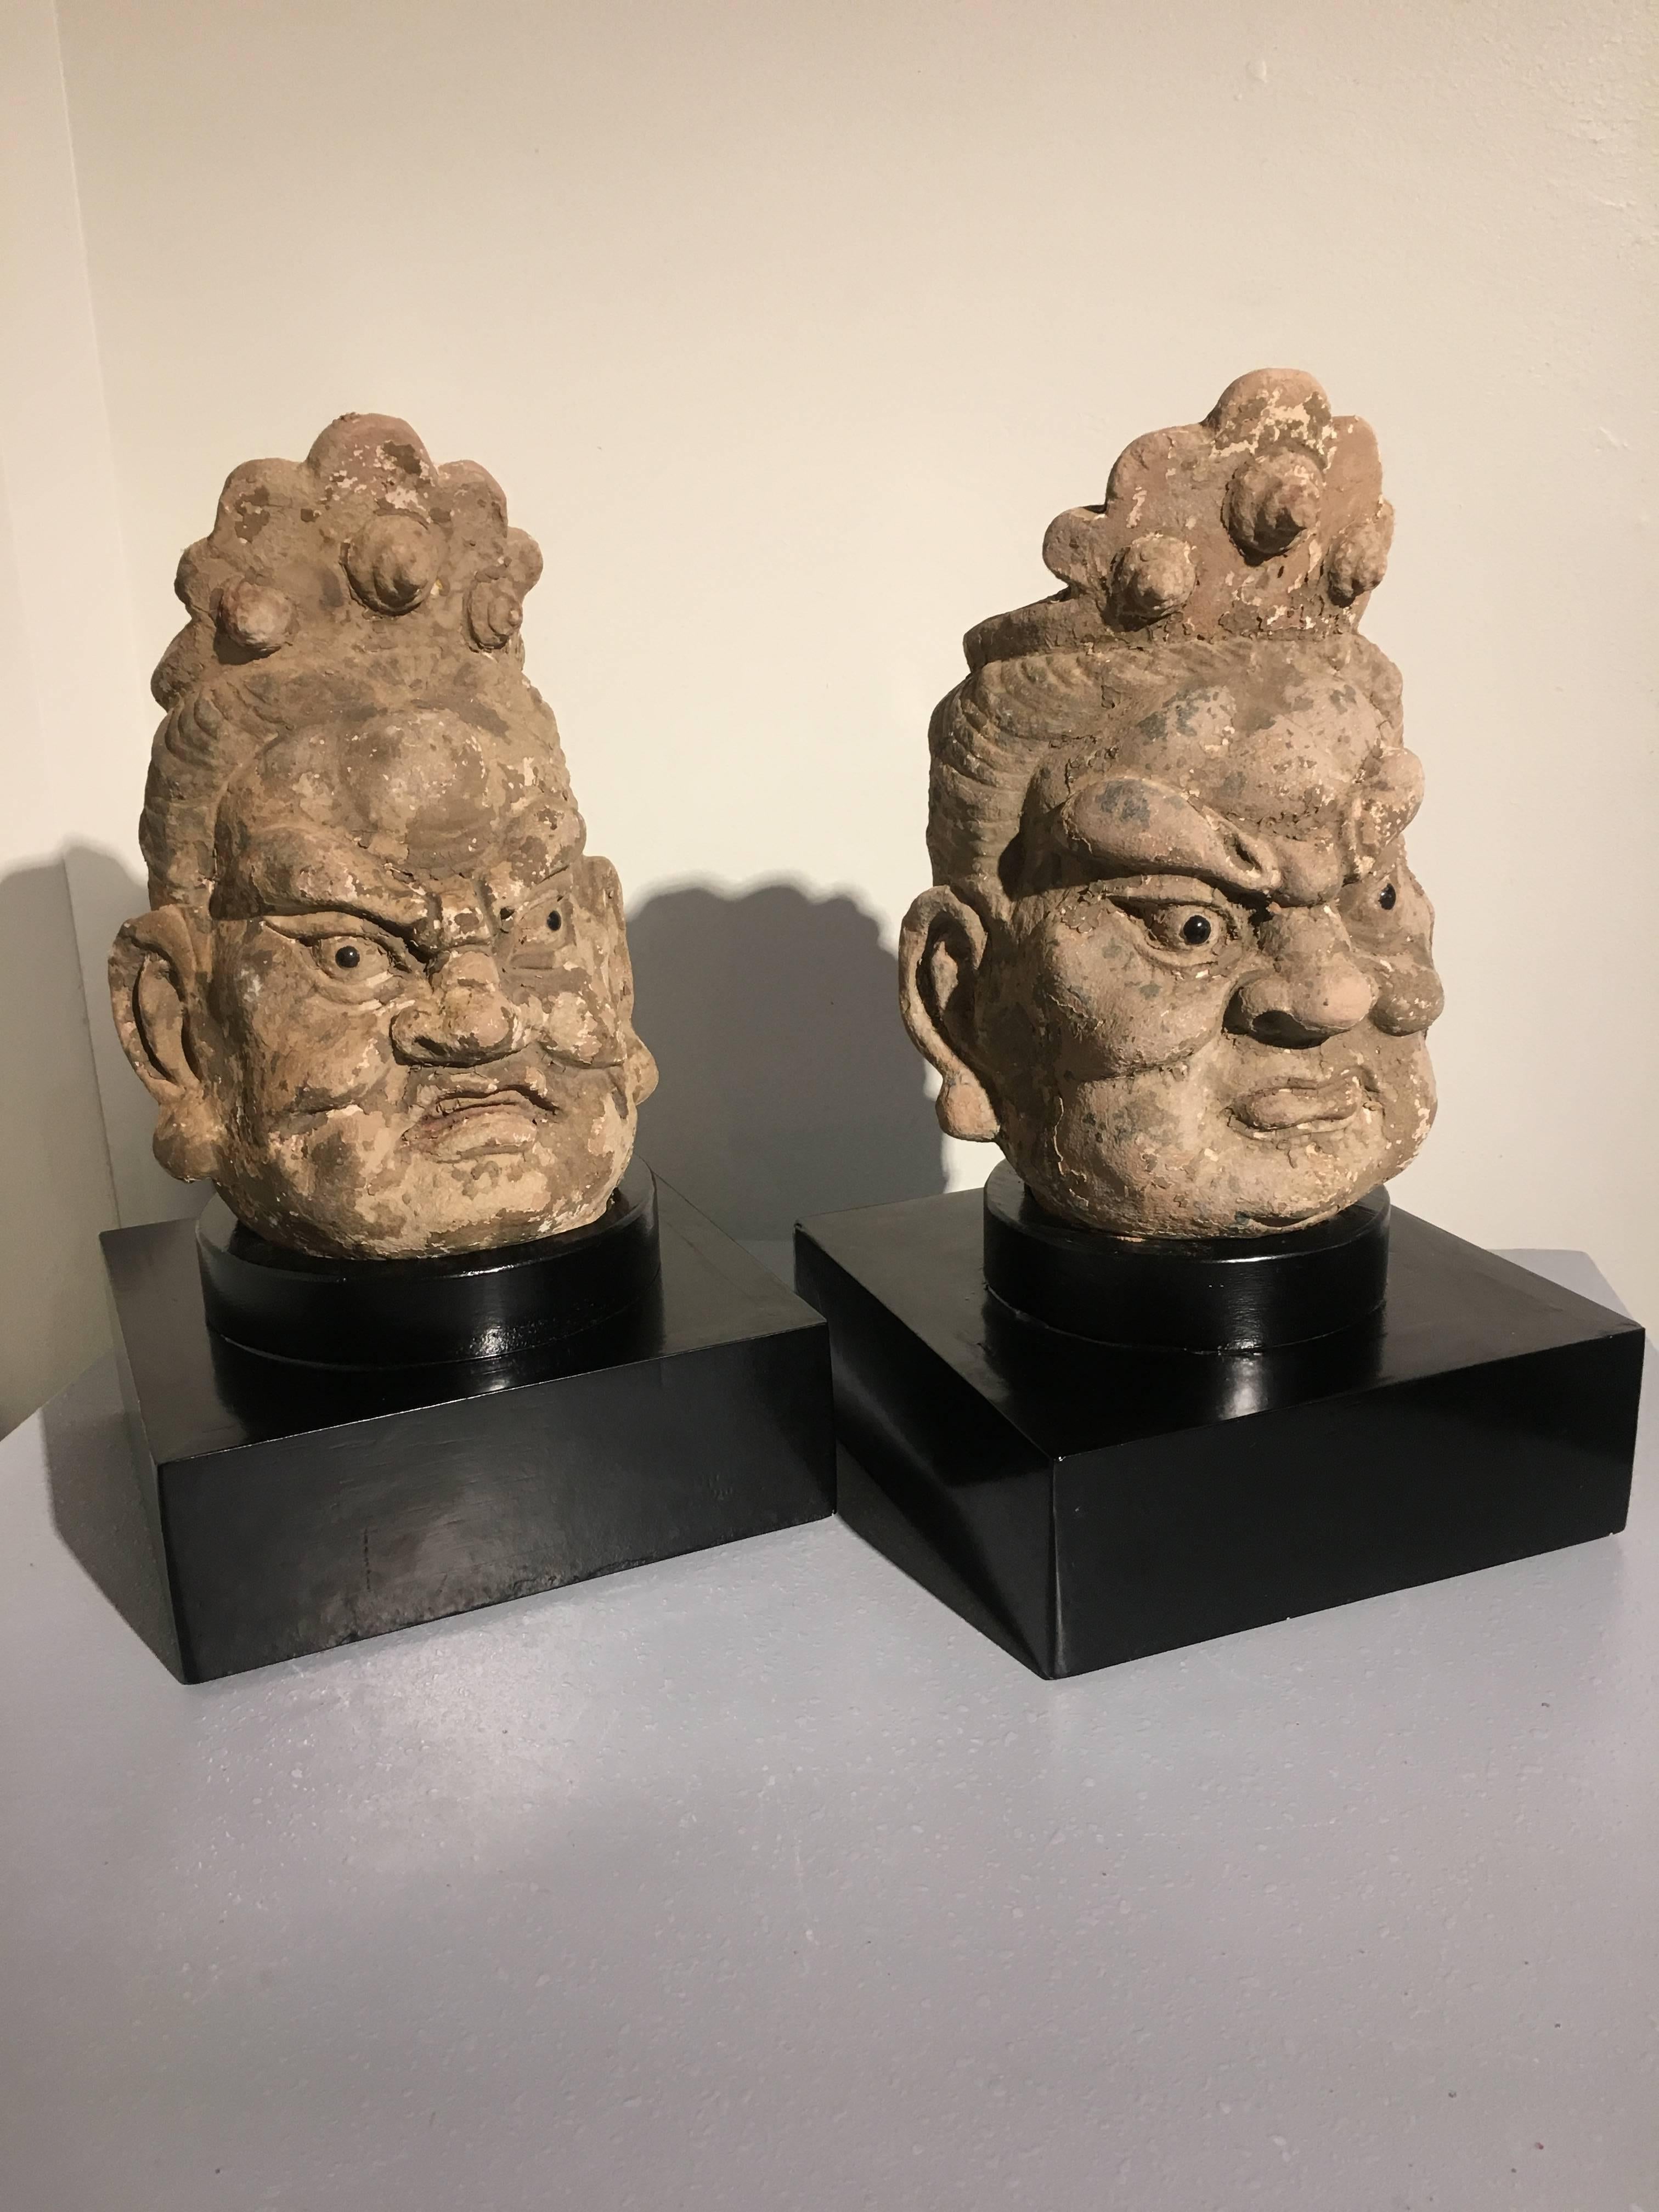 A powerfully sculpted pair of Chinese stucco heads of guardian figures, called lokapalas, Yuan to Ming Dynasty, circa 14th century.  

Originally part of larger than life sized figures of dvarapala (gate or door guardians), these fearsome warriors